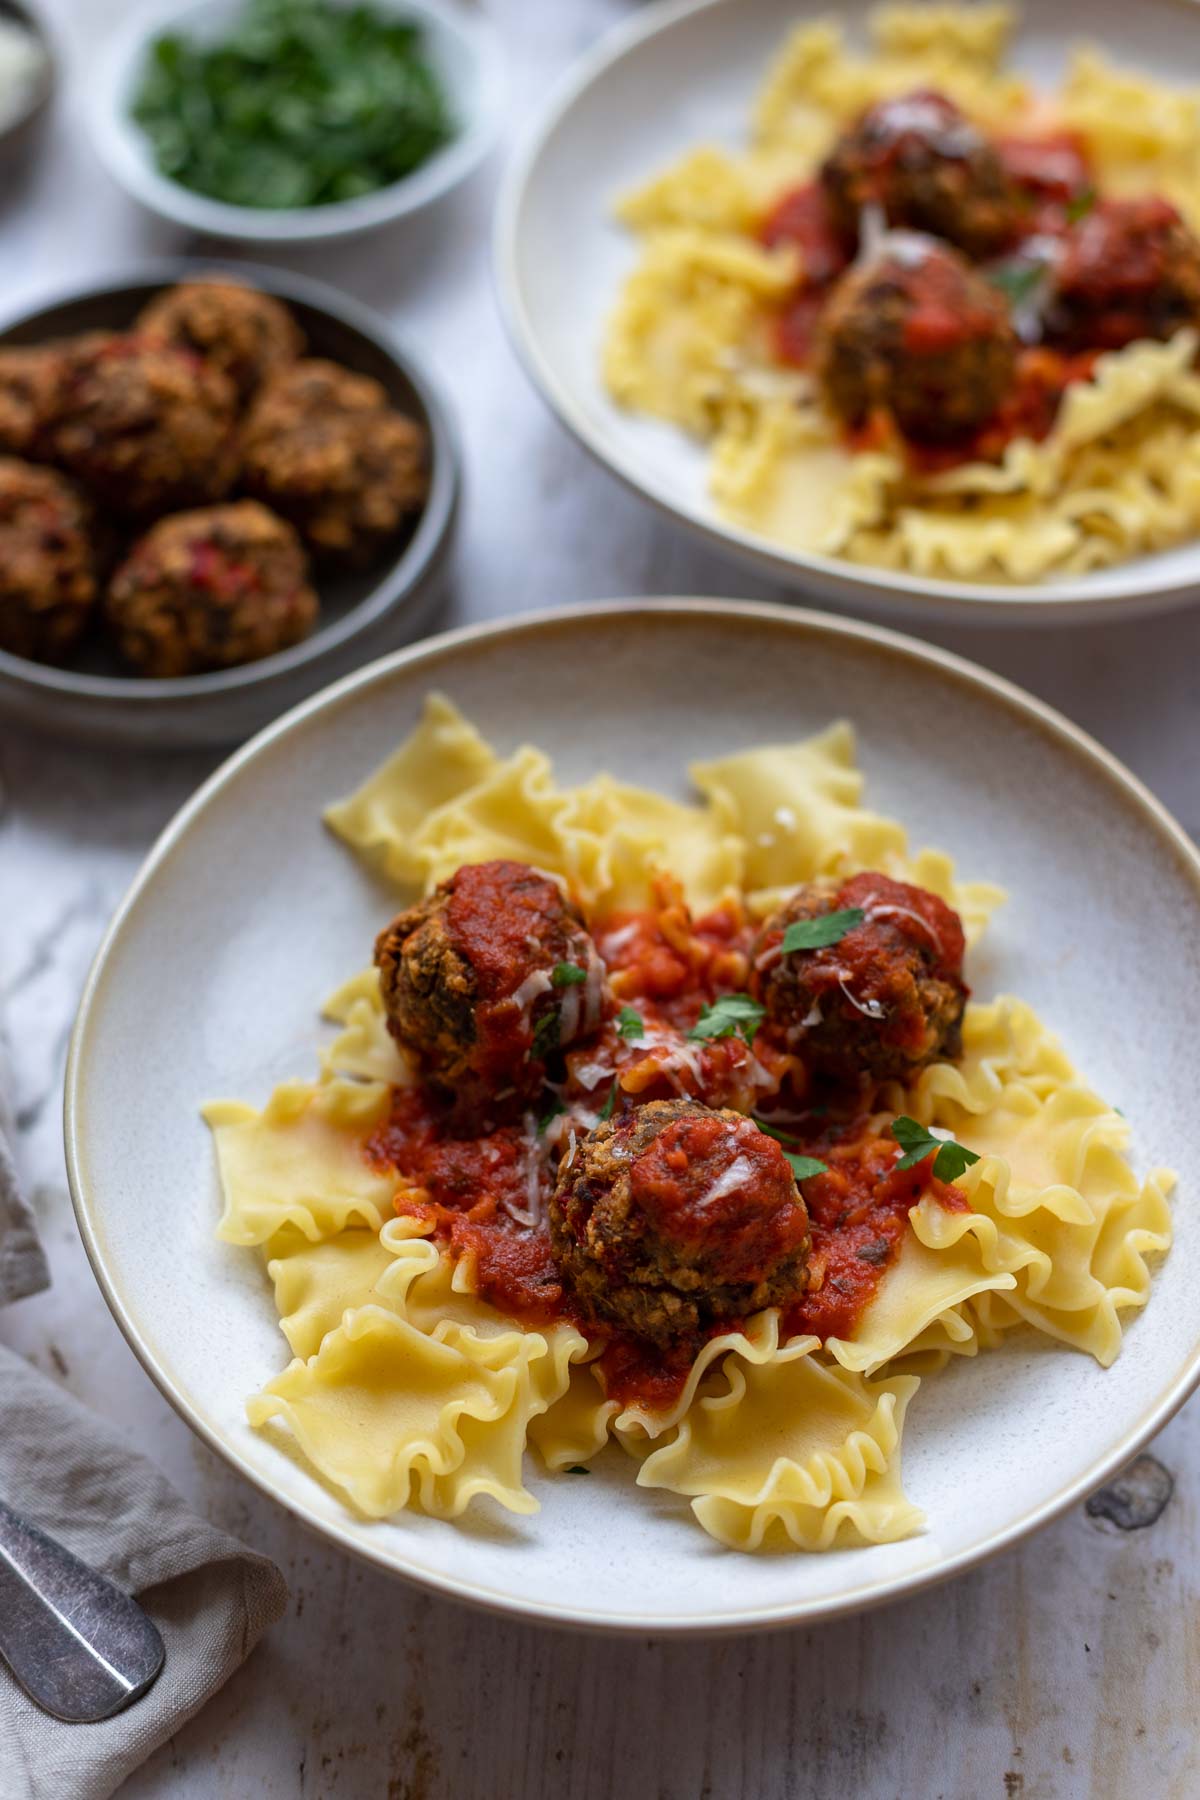 Vegetarian eggplant meatballs with pasta and tomato sauce